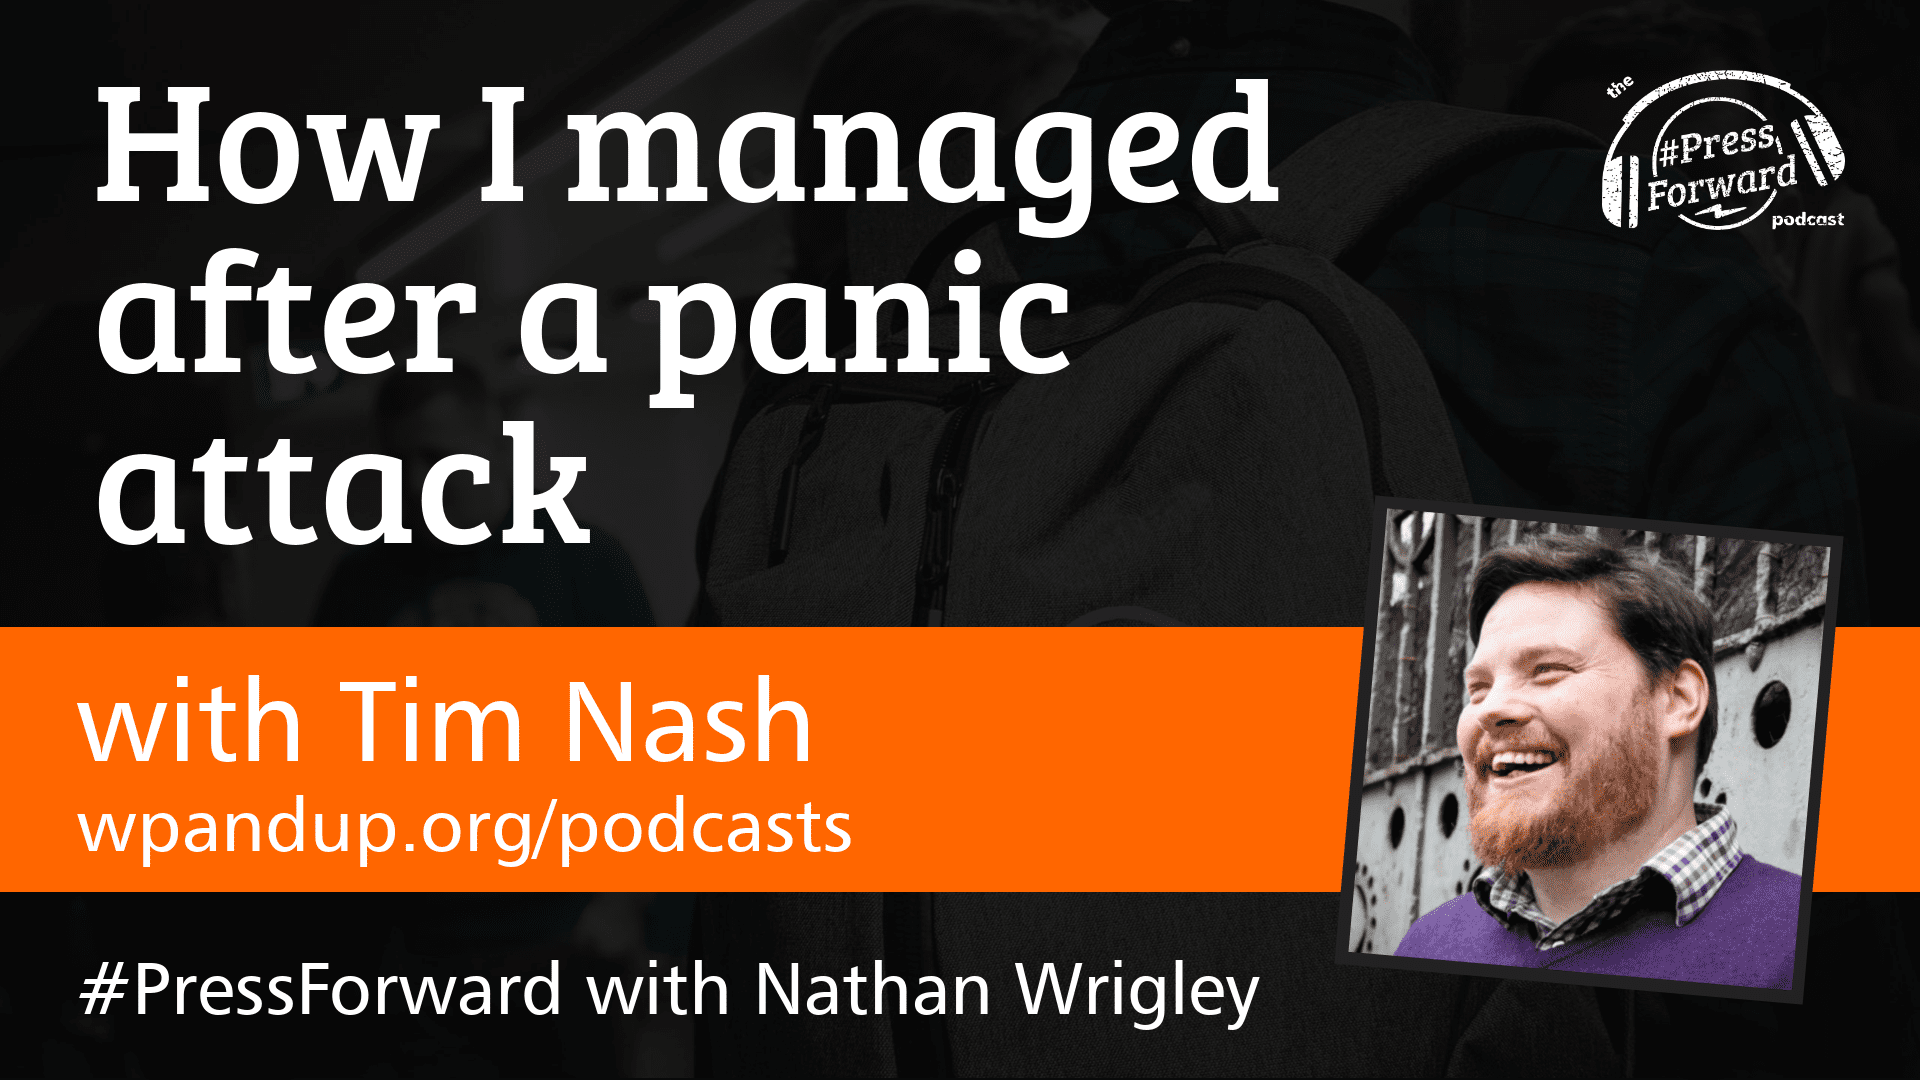 How I managed after a panic attack - #032